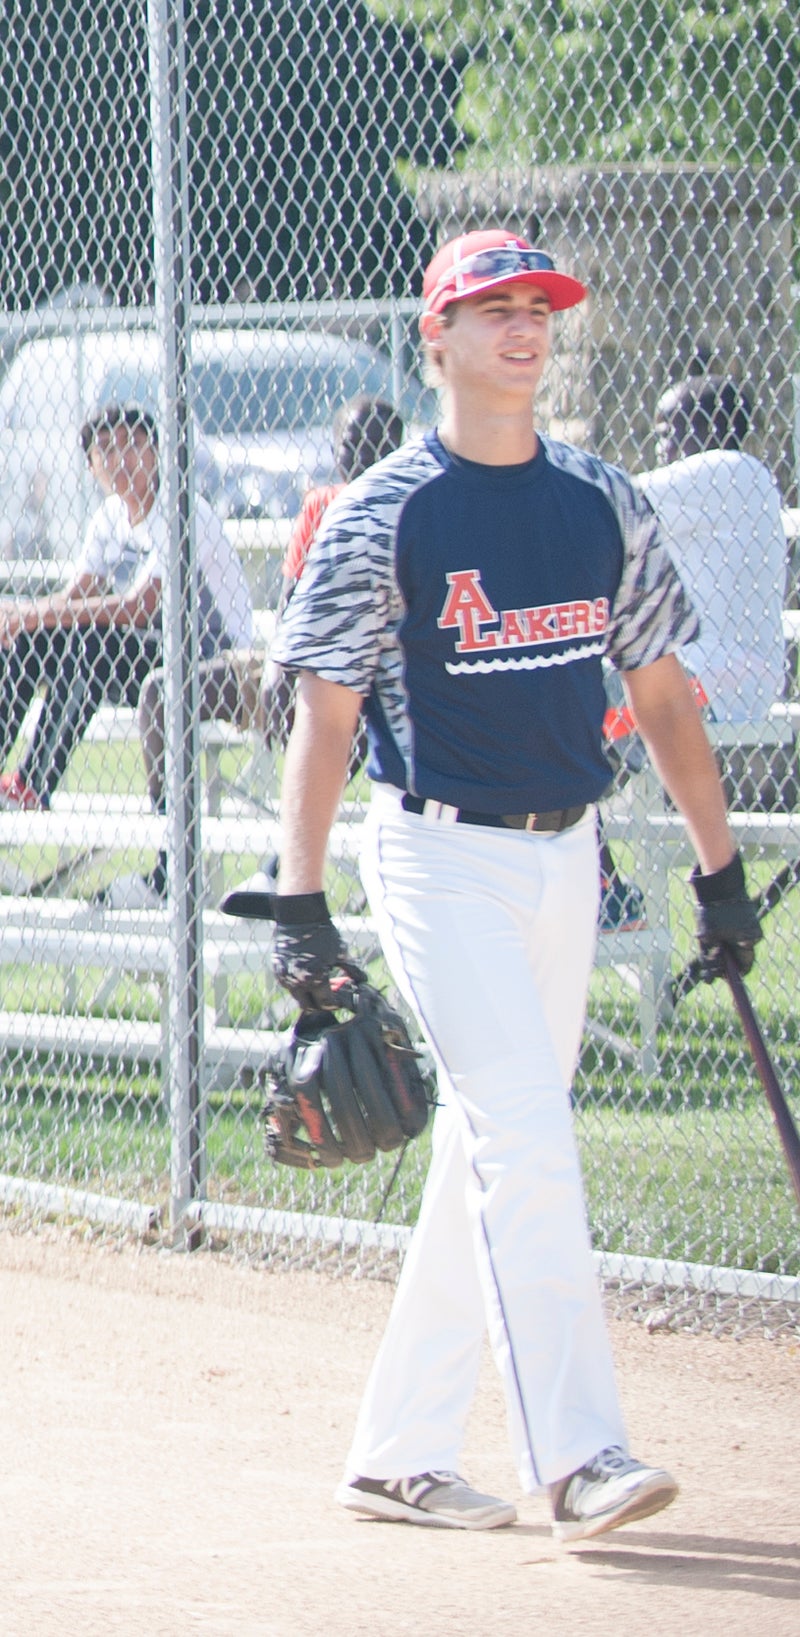 Thompson makes his way toward the batting cage as a member of the Albert Lea Lakers before Thursday’s game against the U.S. Military All-Stars.